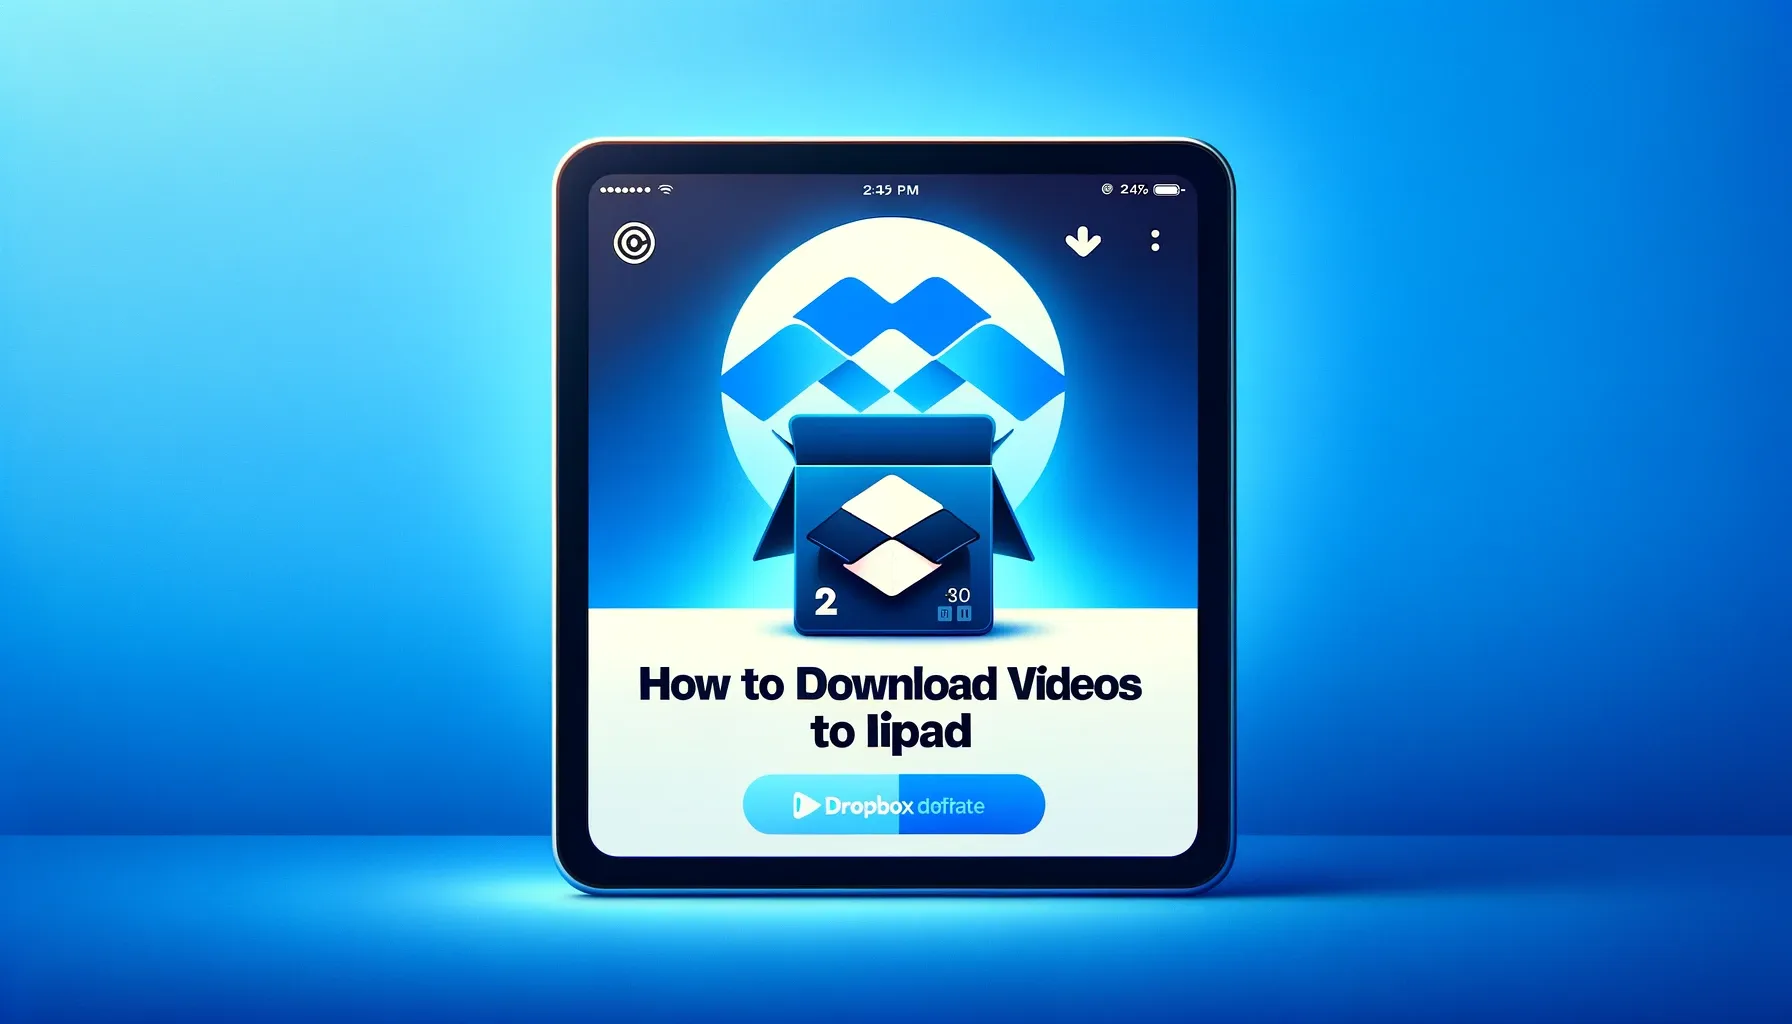 How to download videos from Dropbox to iPad